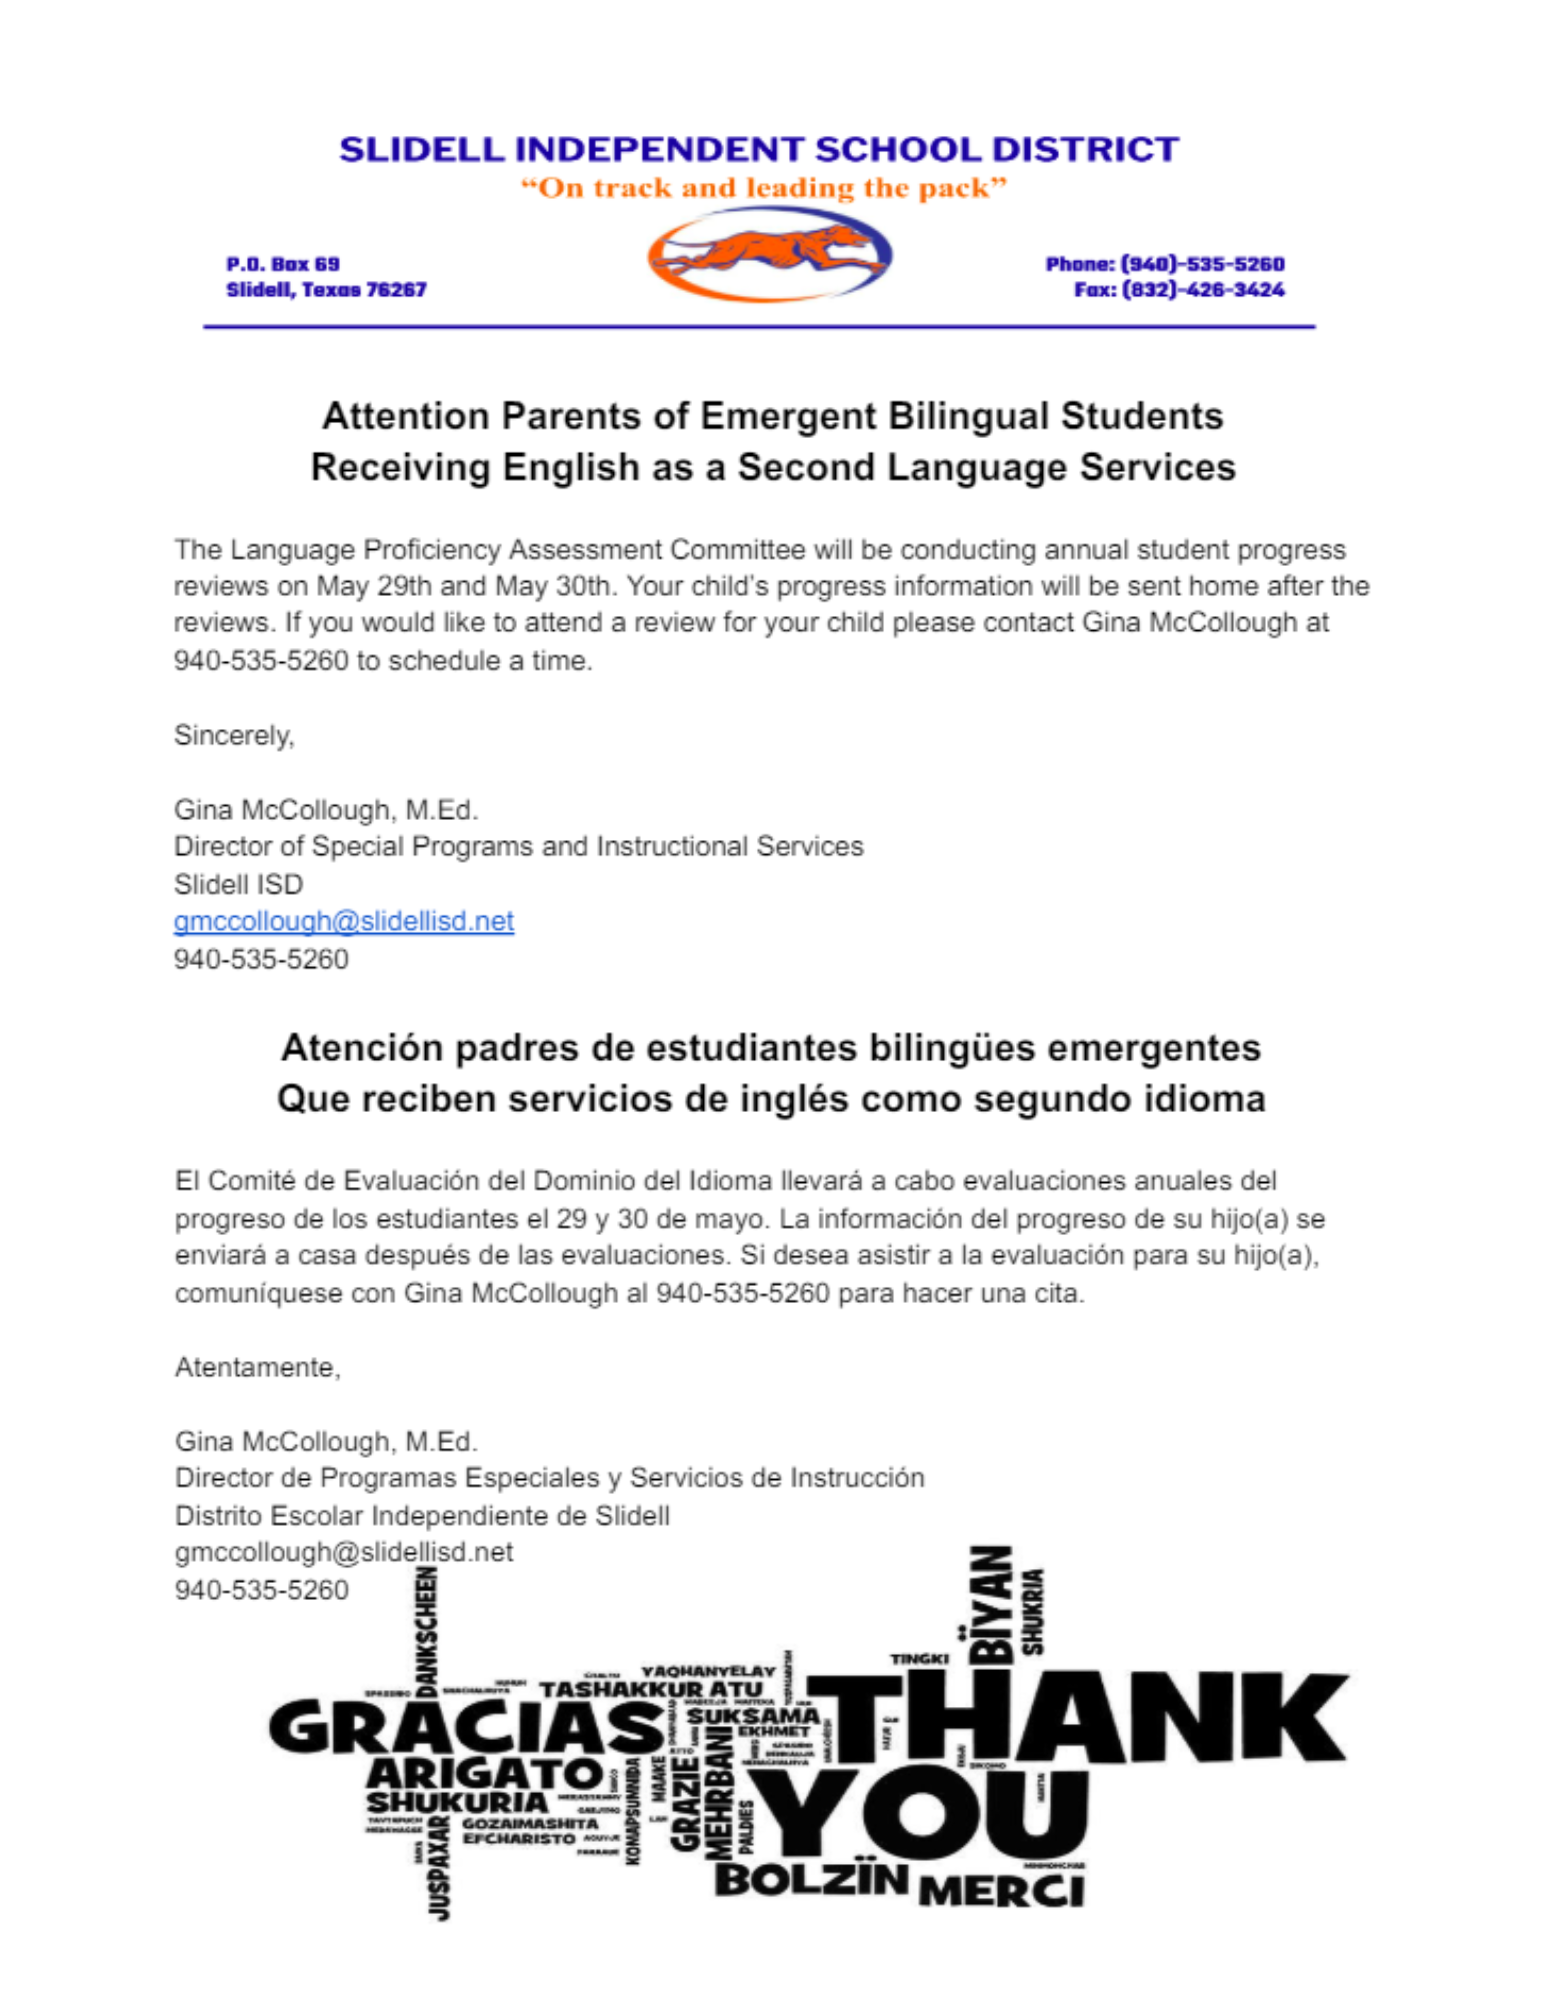 Attention Parents of Emergent Bilingual Students Receiving English as a Second Language Services